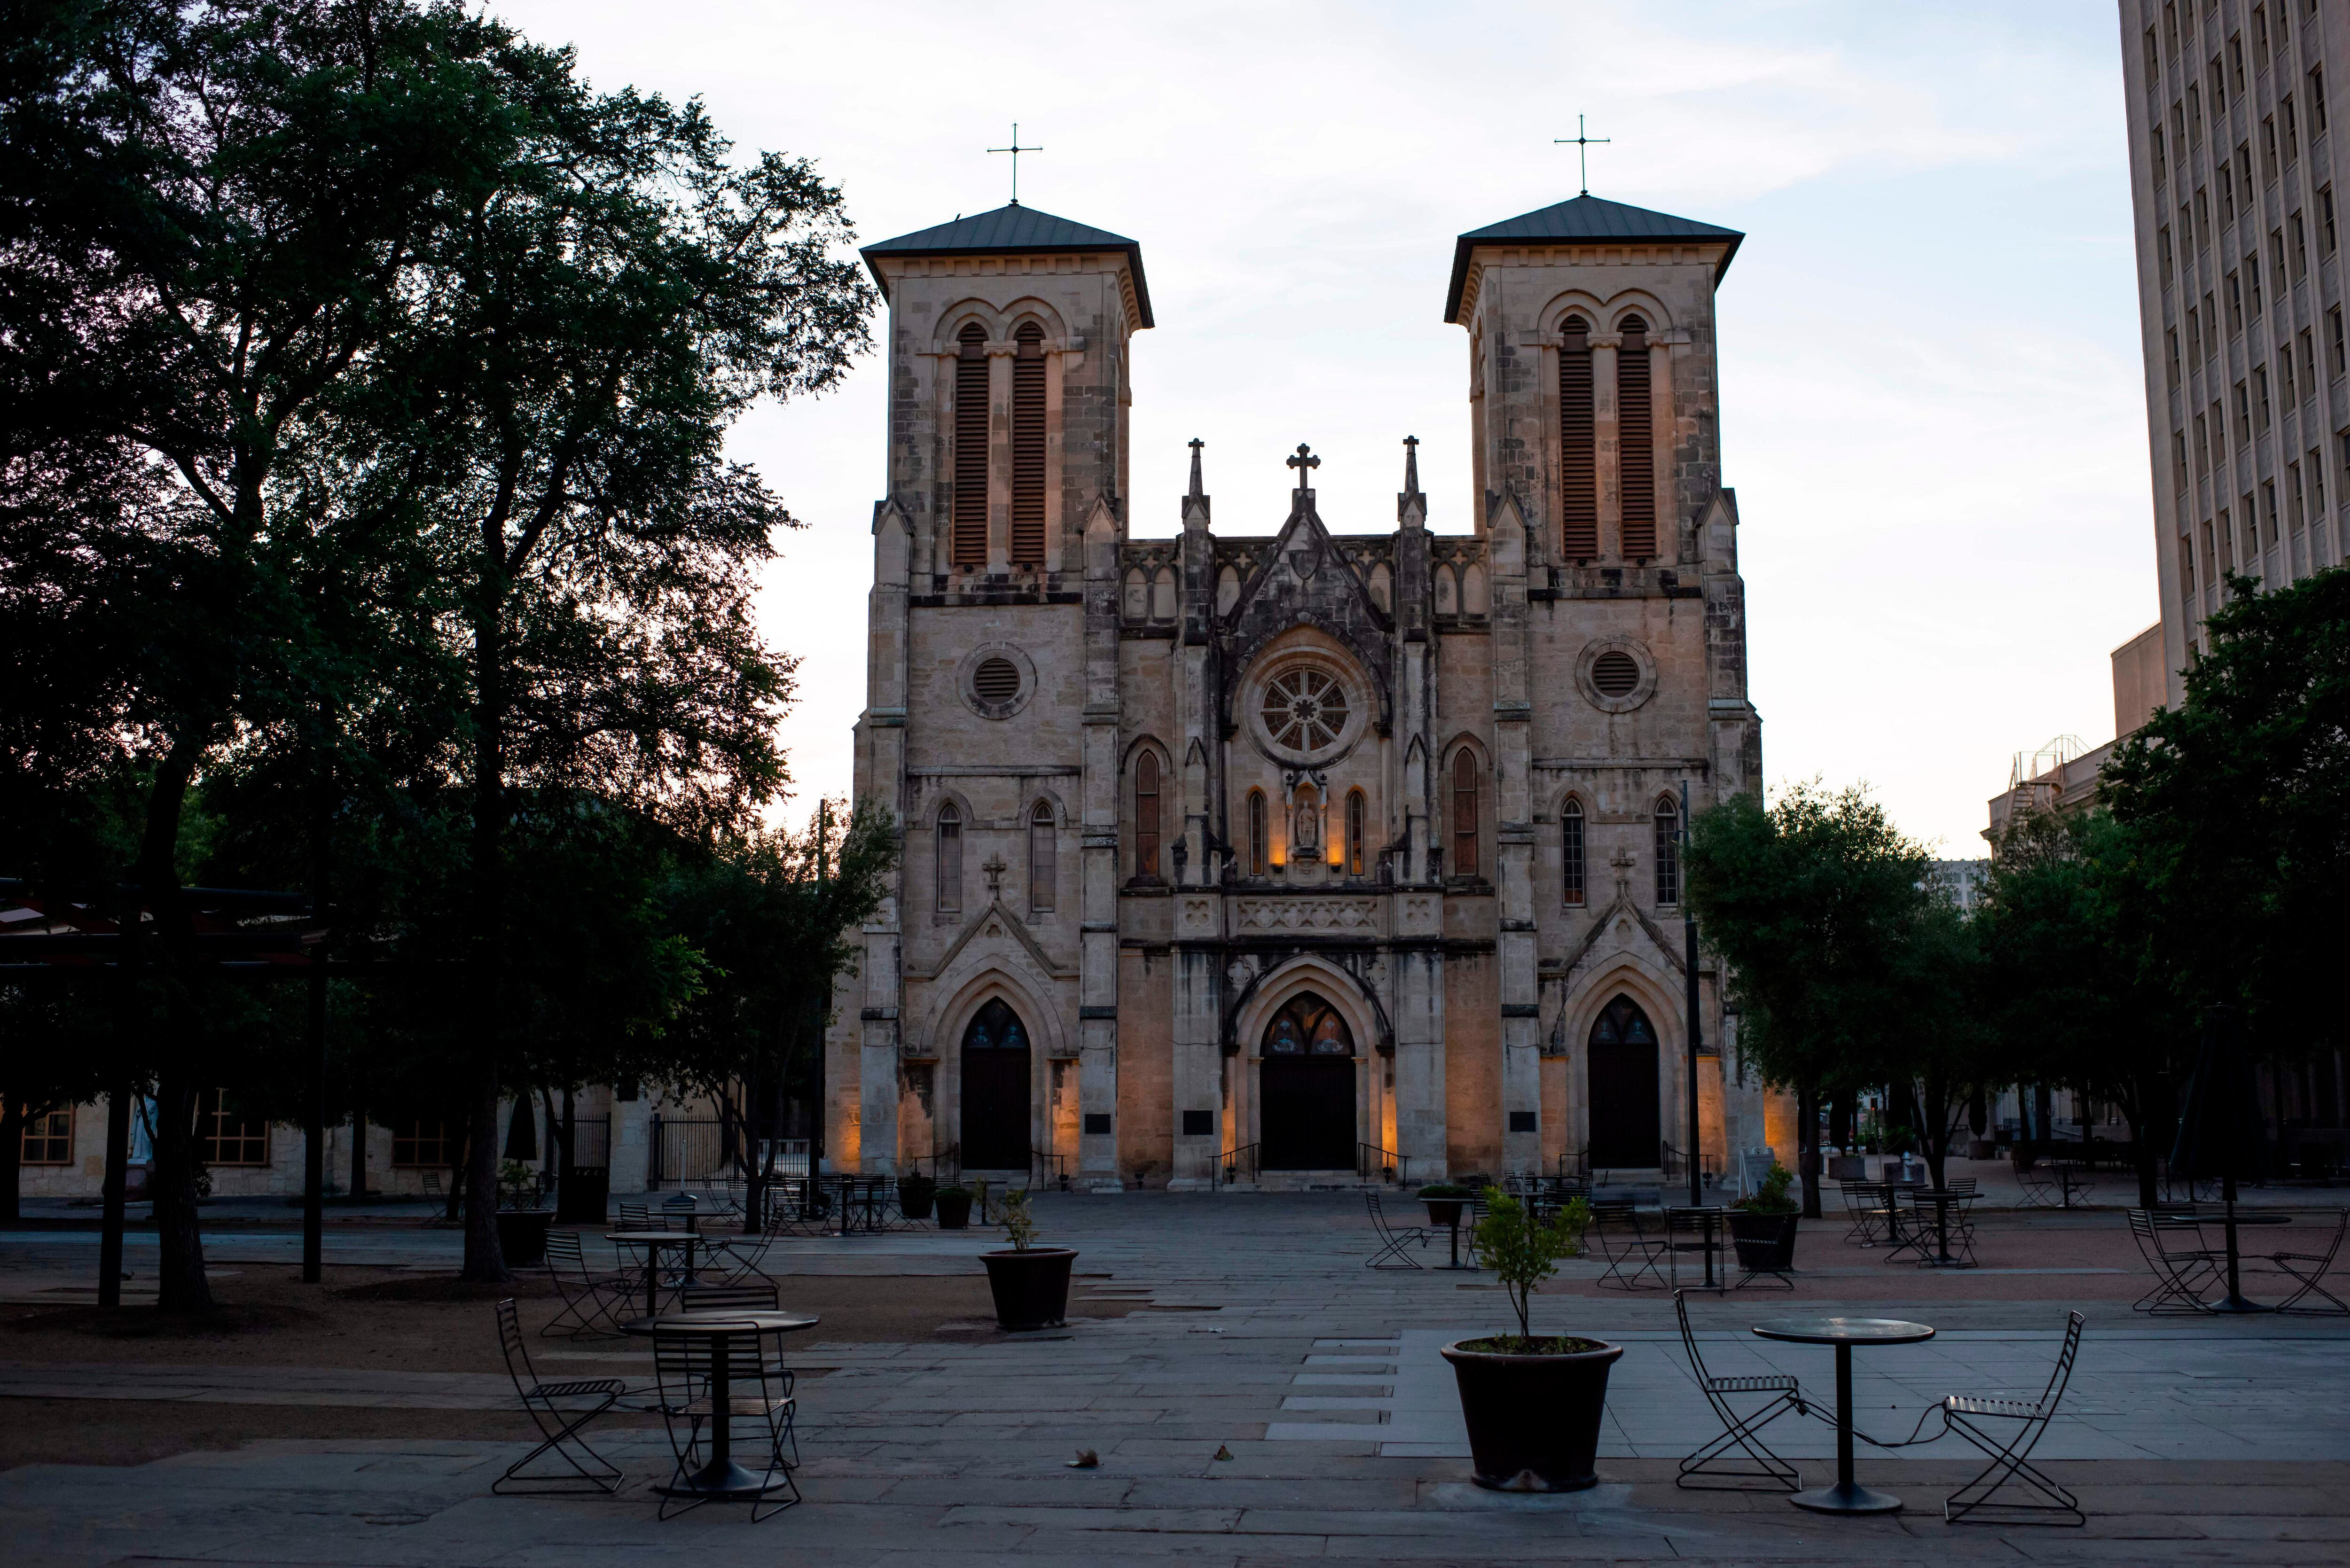 San Fernando Cathedral on April 1, 2020, in downtown San Antonio, Texas. (Photo by Mark Felix / AFP) (Photo by MARK FELIX/AFP /AFP via Getty Images)